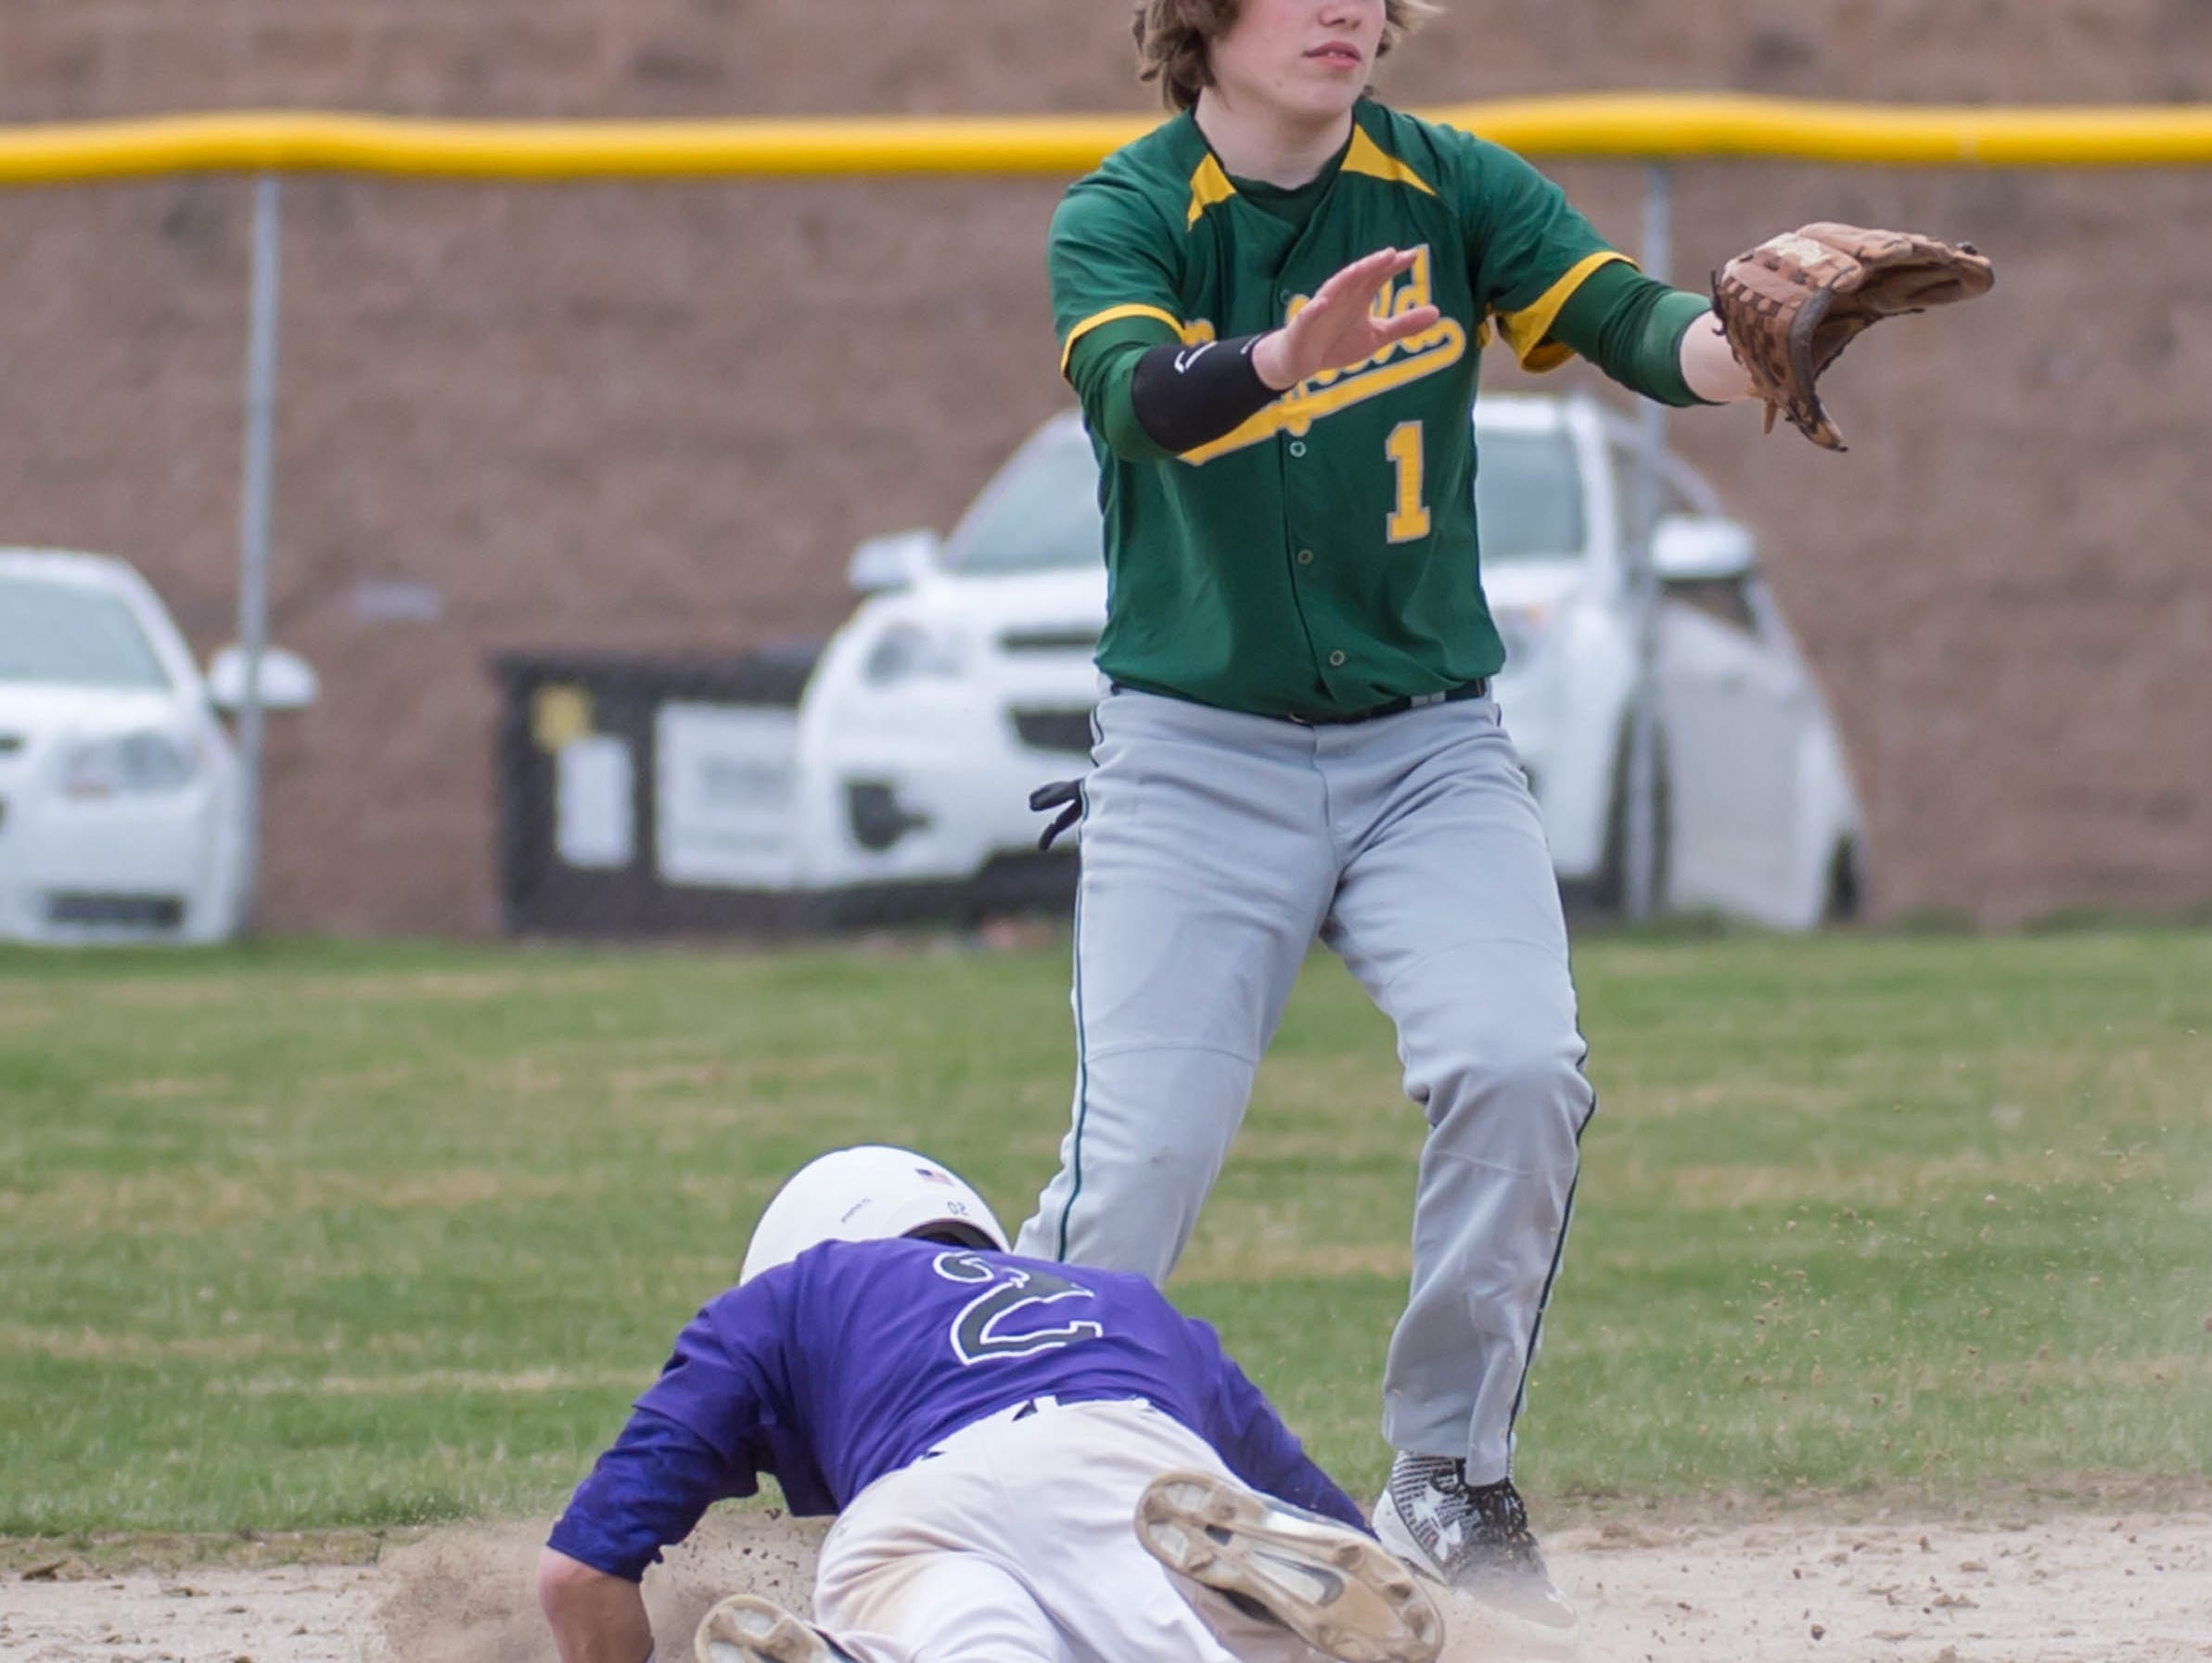 Pennfield's Tyler Eddy (1) covers second as Lakeview's Gavin Homer (2) slides back.